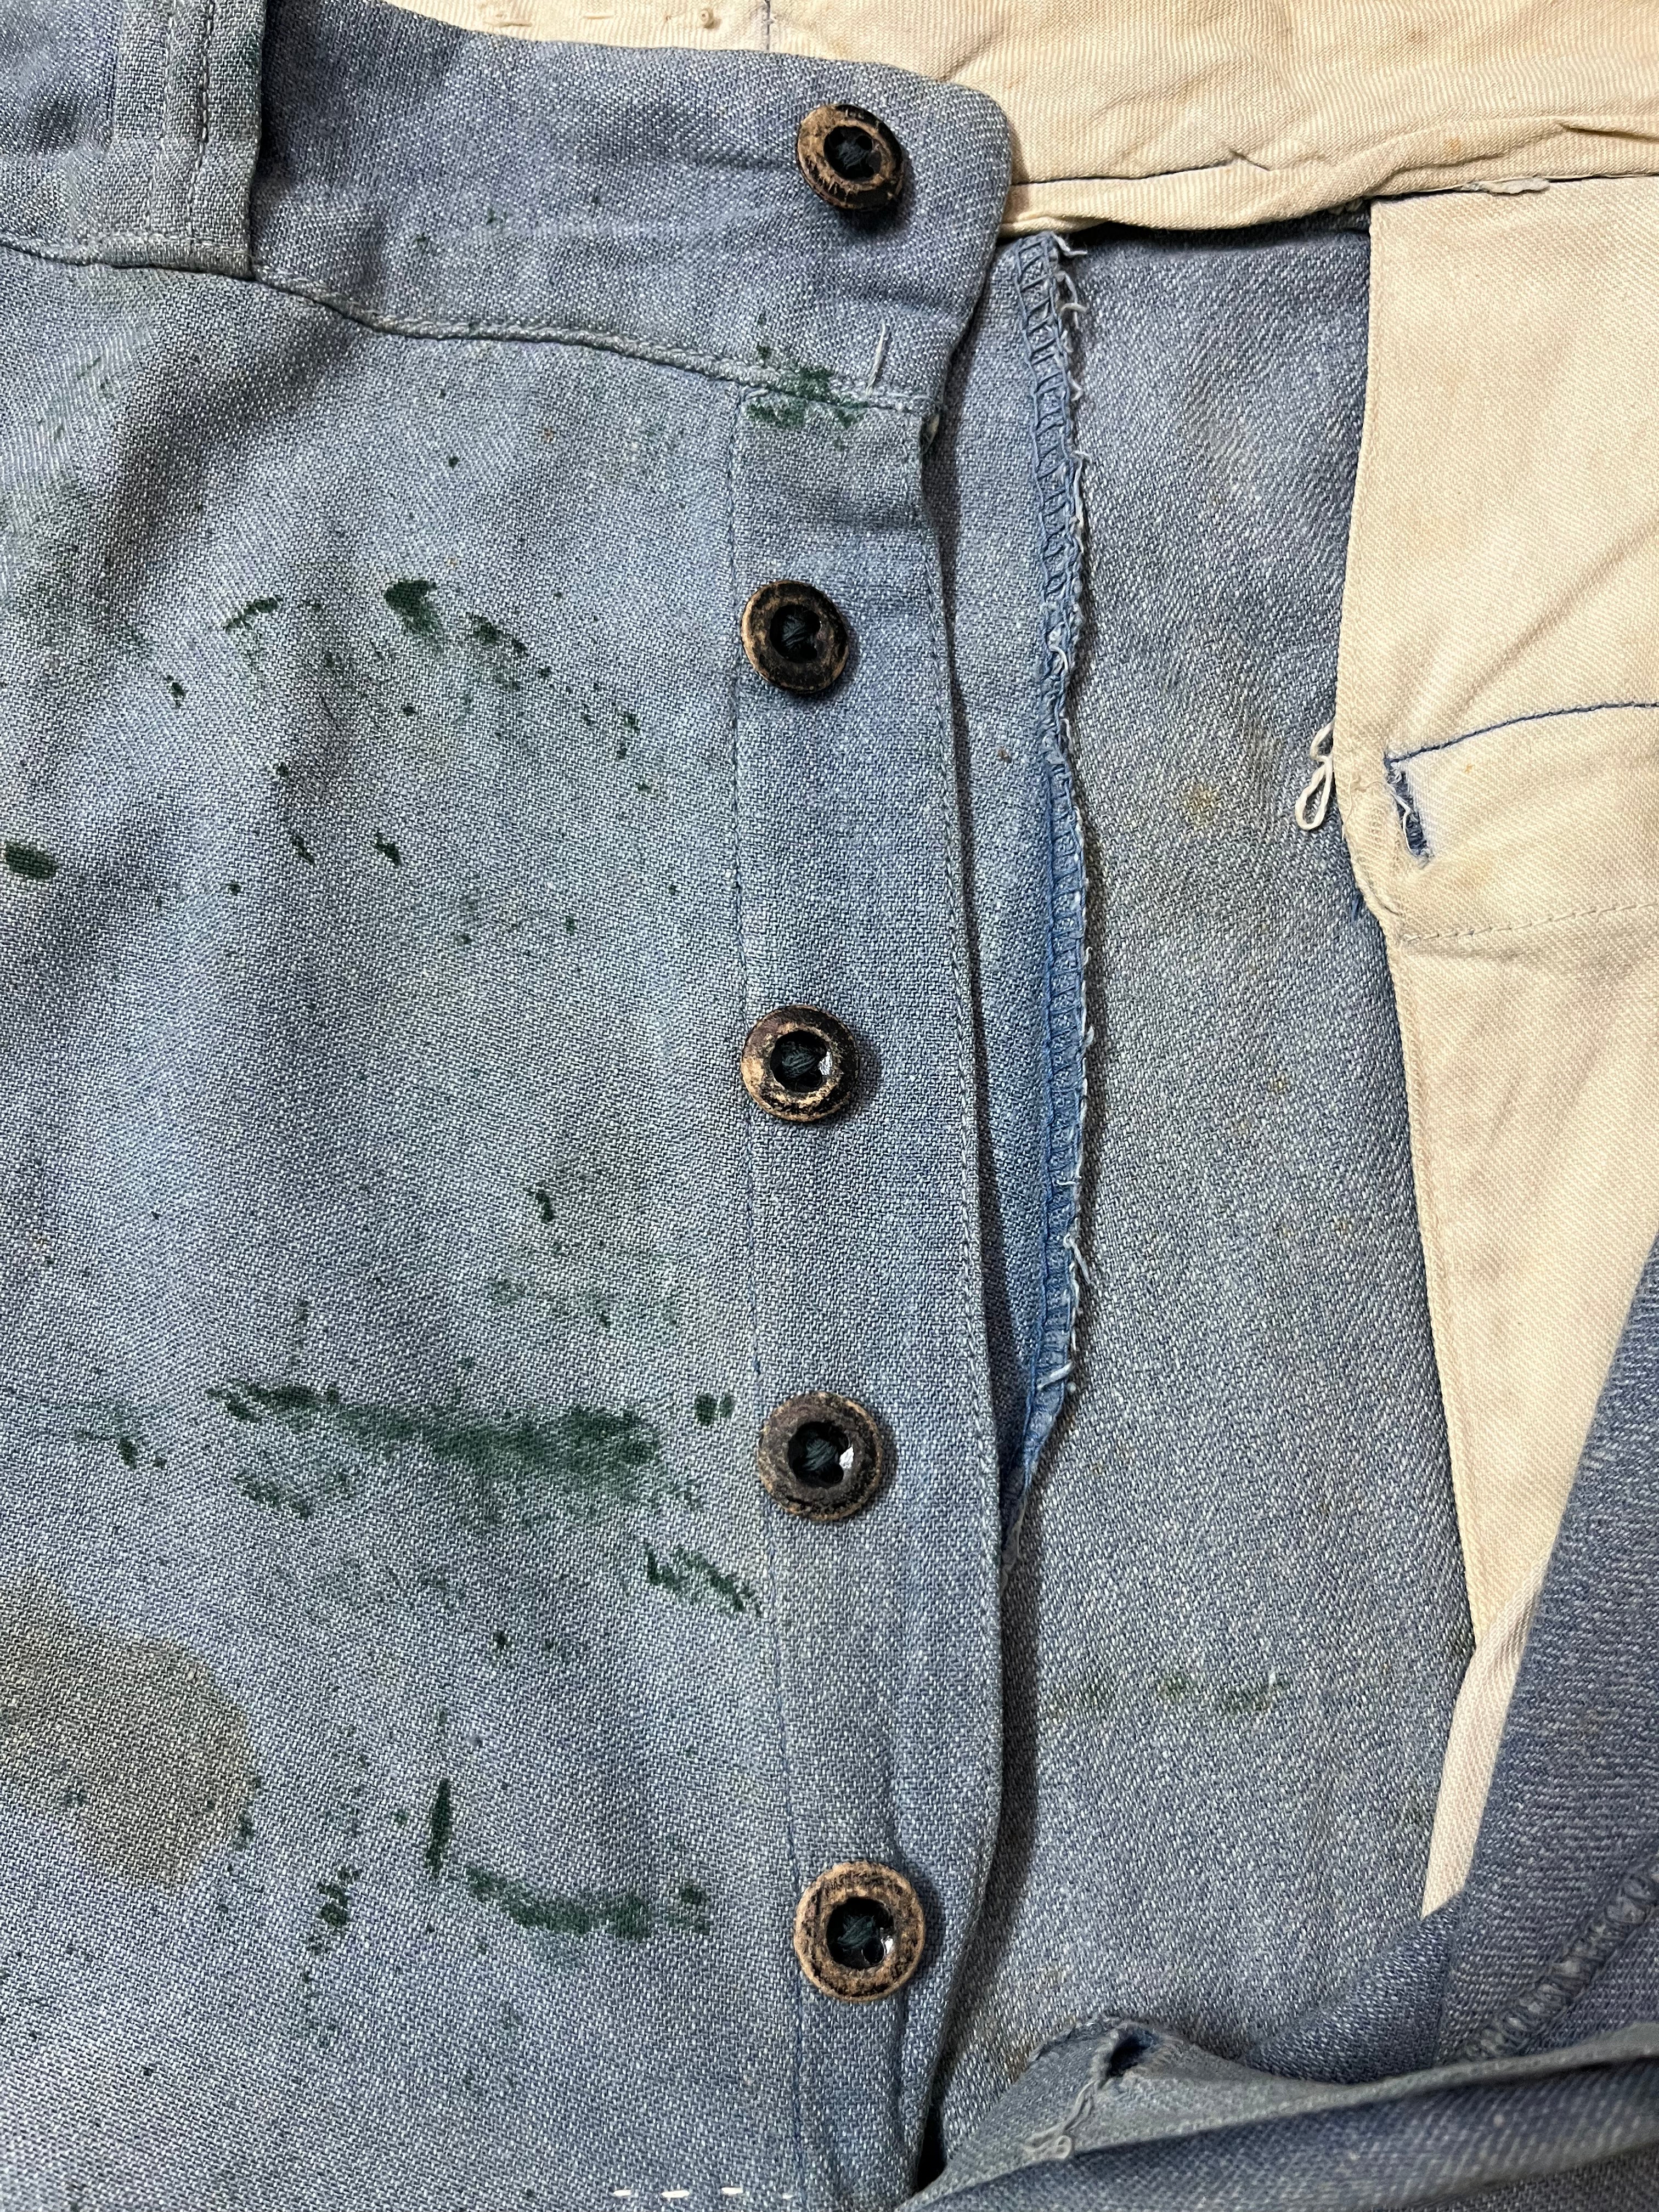 Early 1940s Blue Salt & Pepper Pants with Repairs and Paint - Powder Blue - 32x32